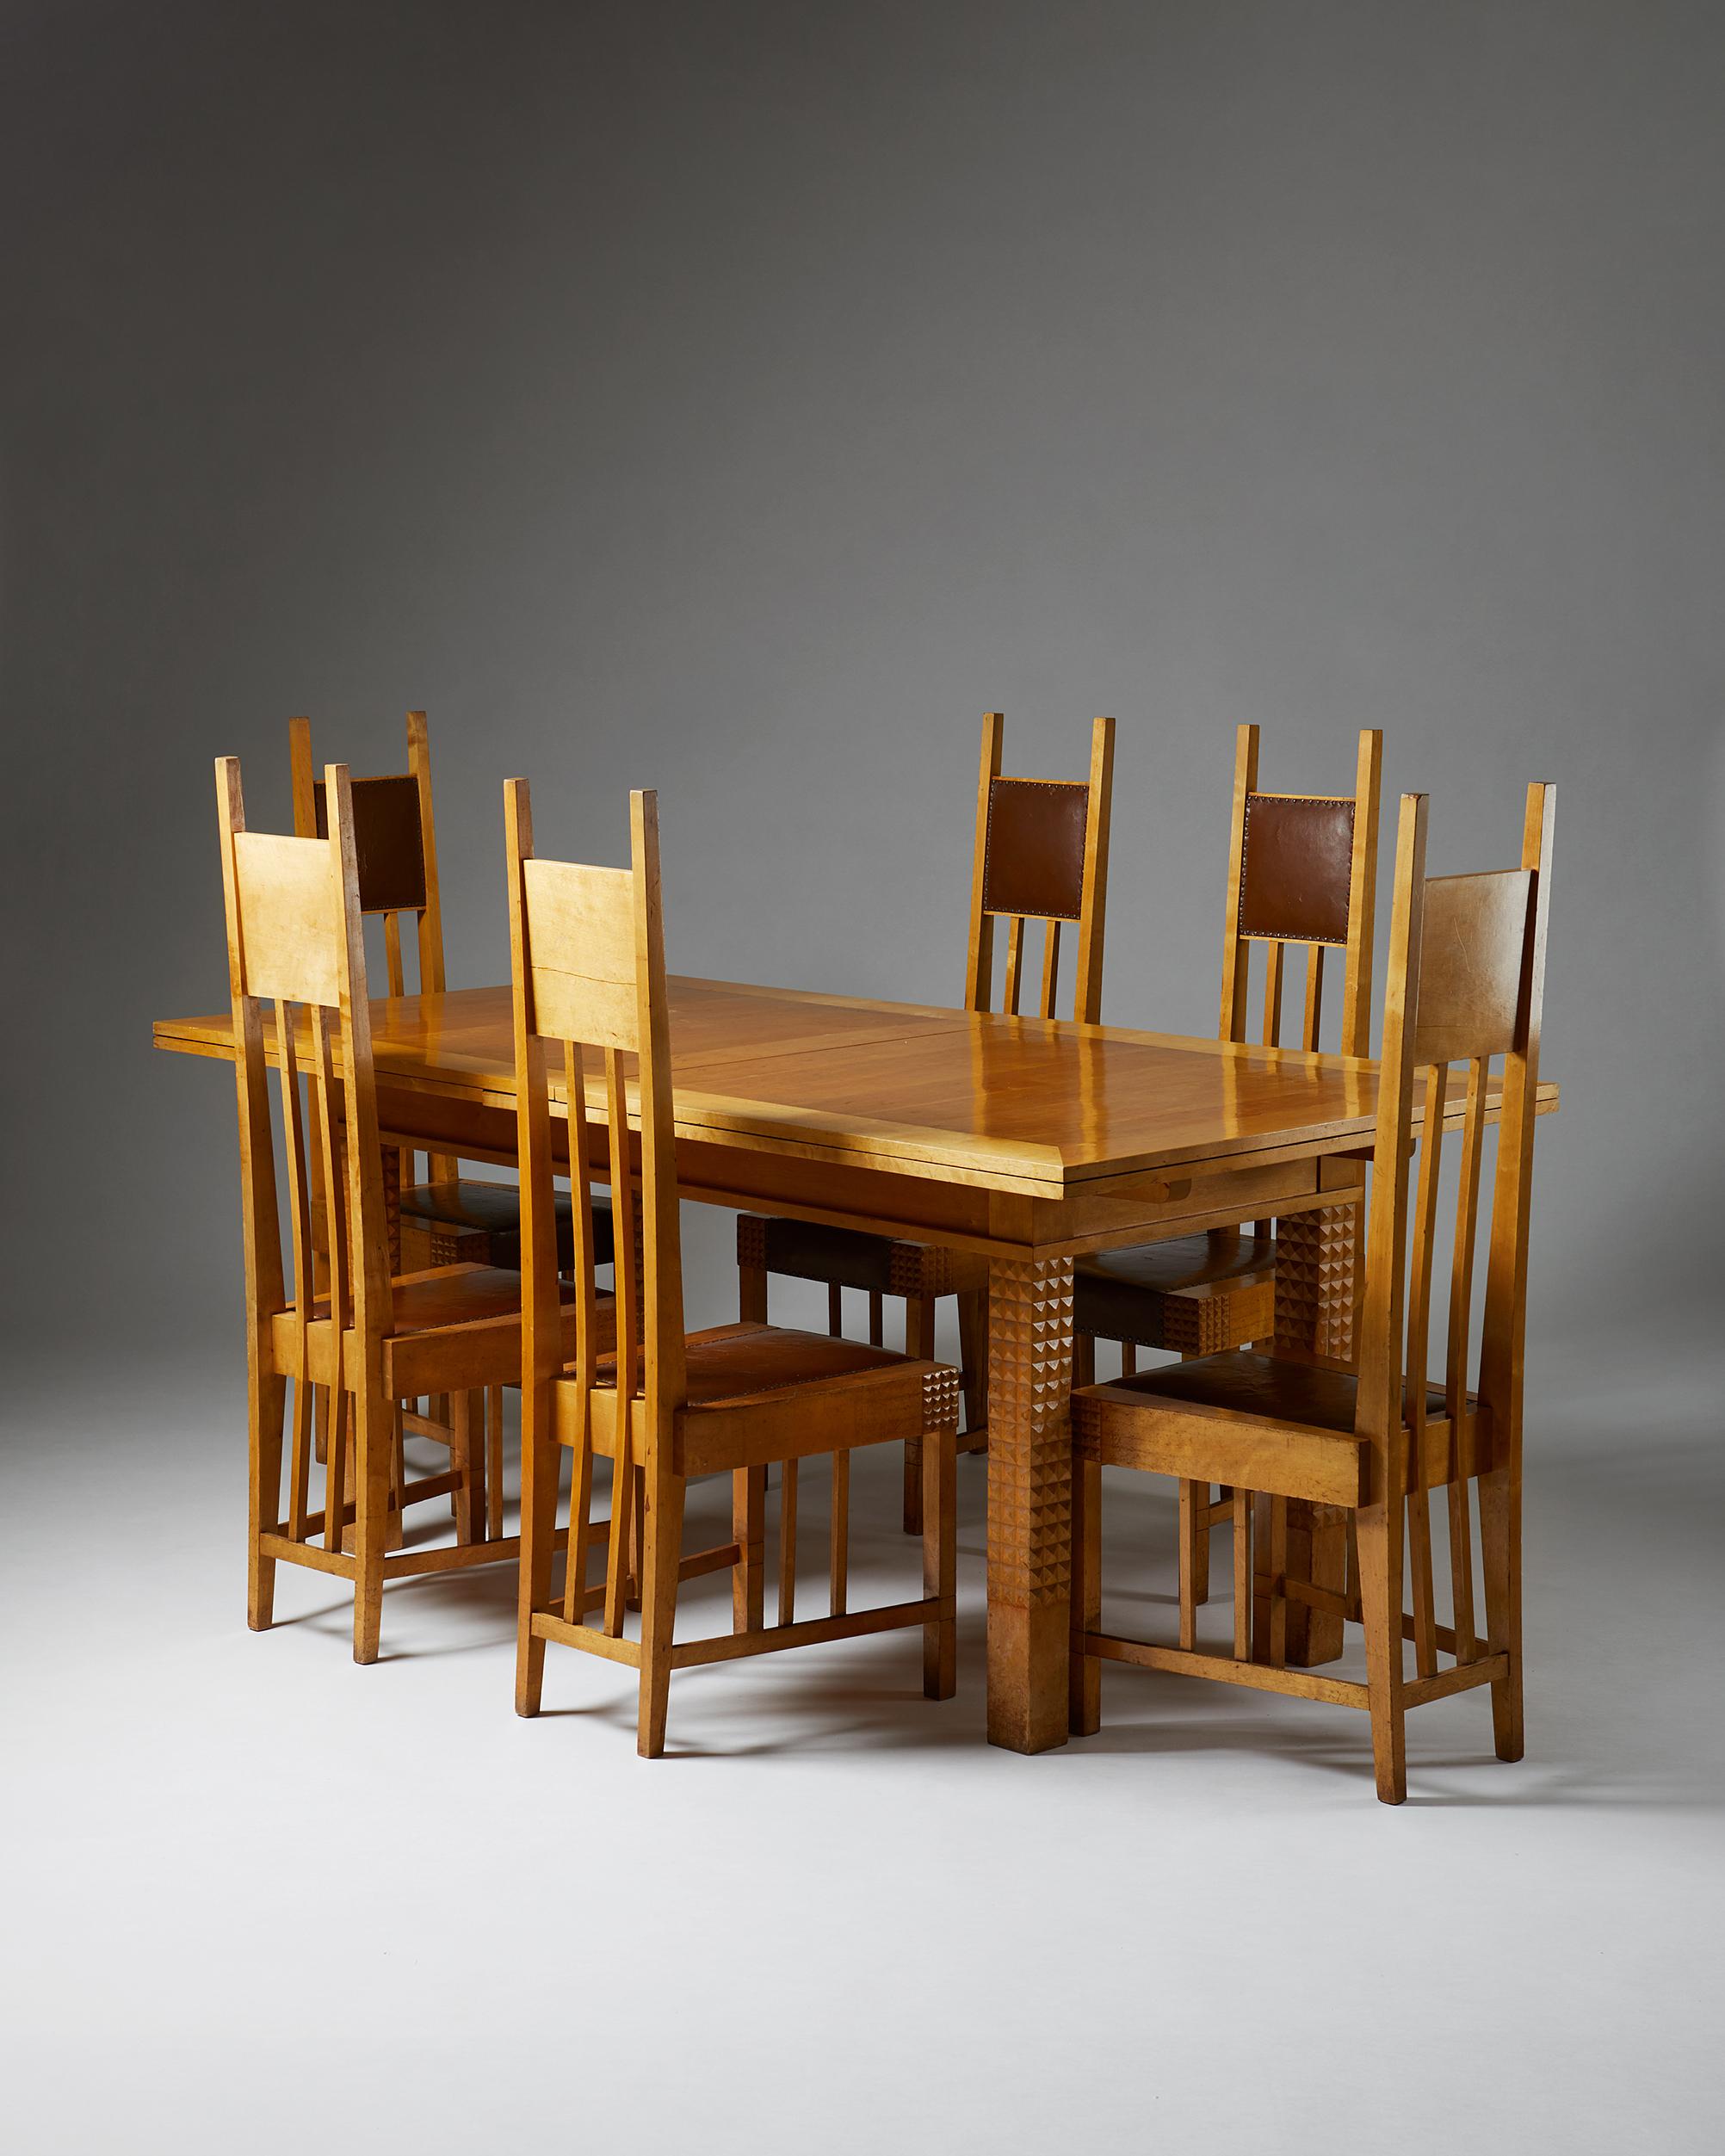 Dining set designed by Uno Ullberg for Hangö Ångsåg & Ångsnickeri AB,
Finland, 1905.

Birch and leather.

Set includes ten dining chairs and dining table.

Uno Ullberg was one of the most important Finnish architects of the early 1900's, drawing